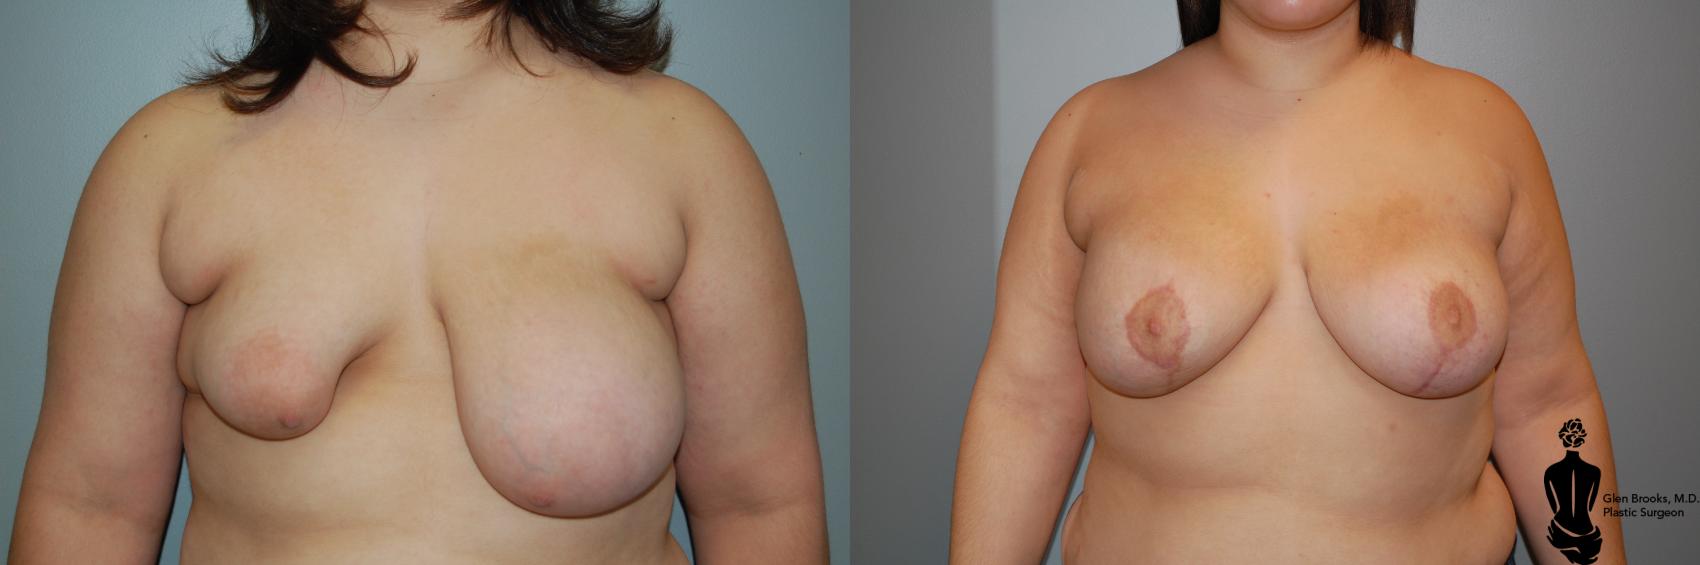 Breast Reconstruction Before & After Photo | Springfield, MA | Aesthetic Plastic & Reconstructive Surgery